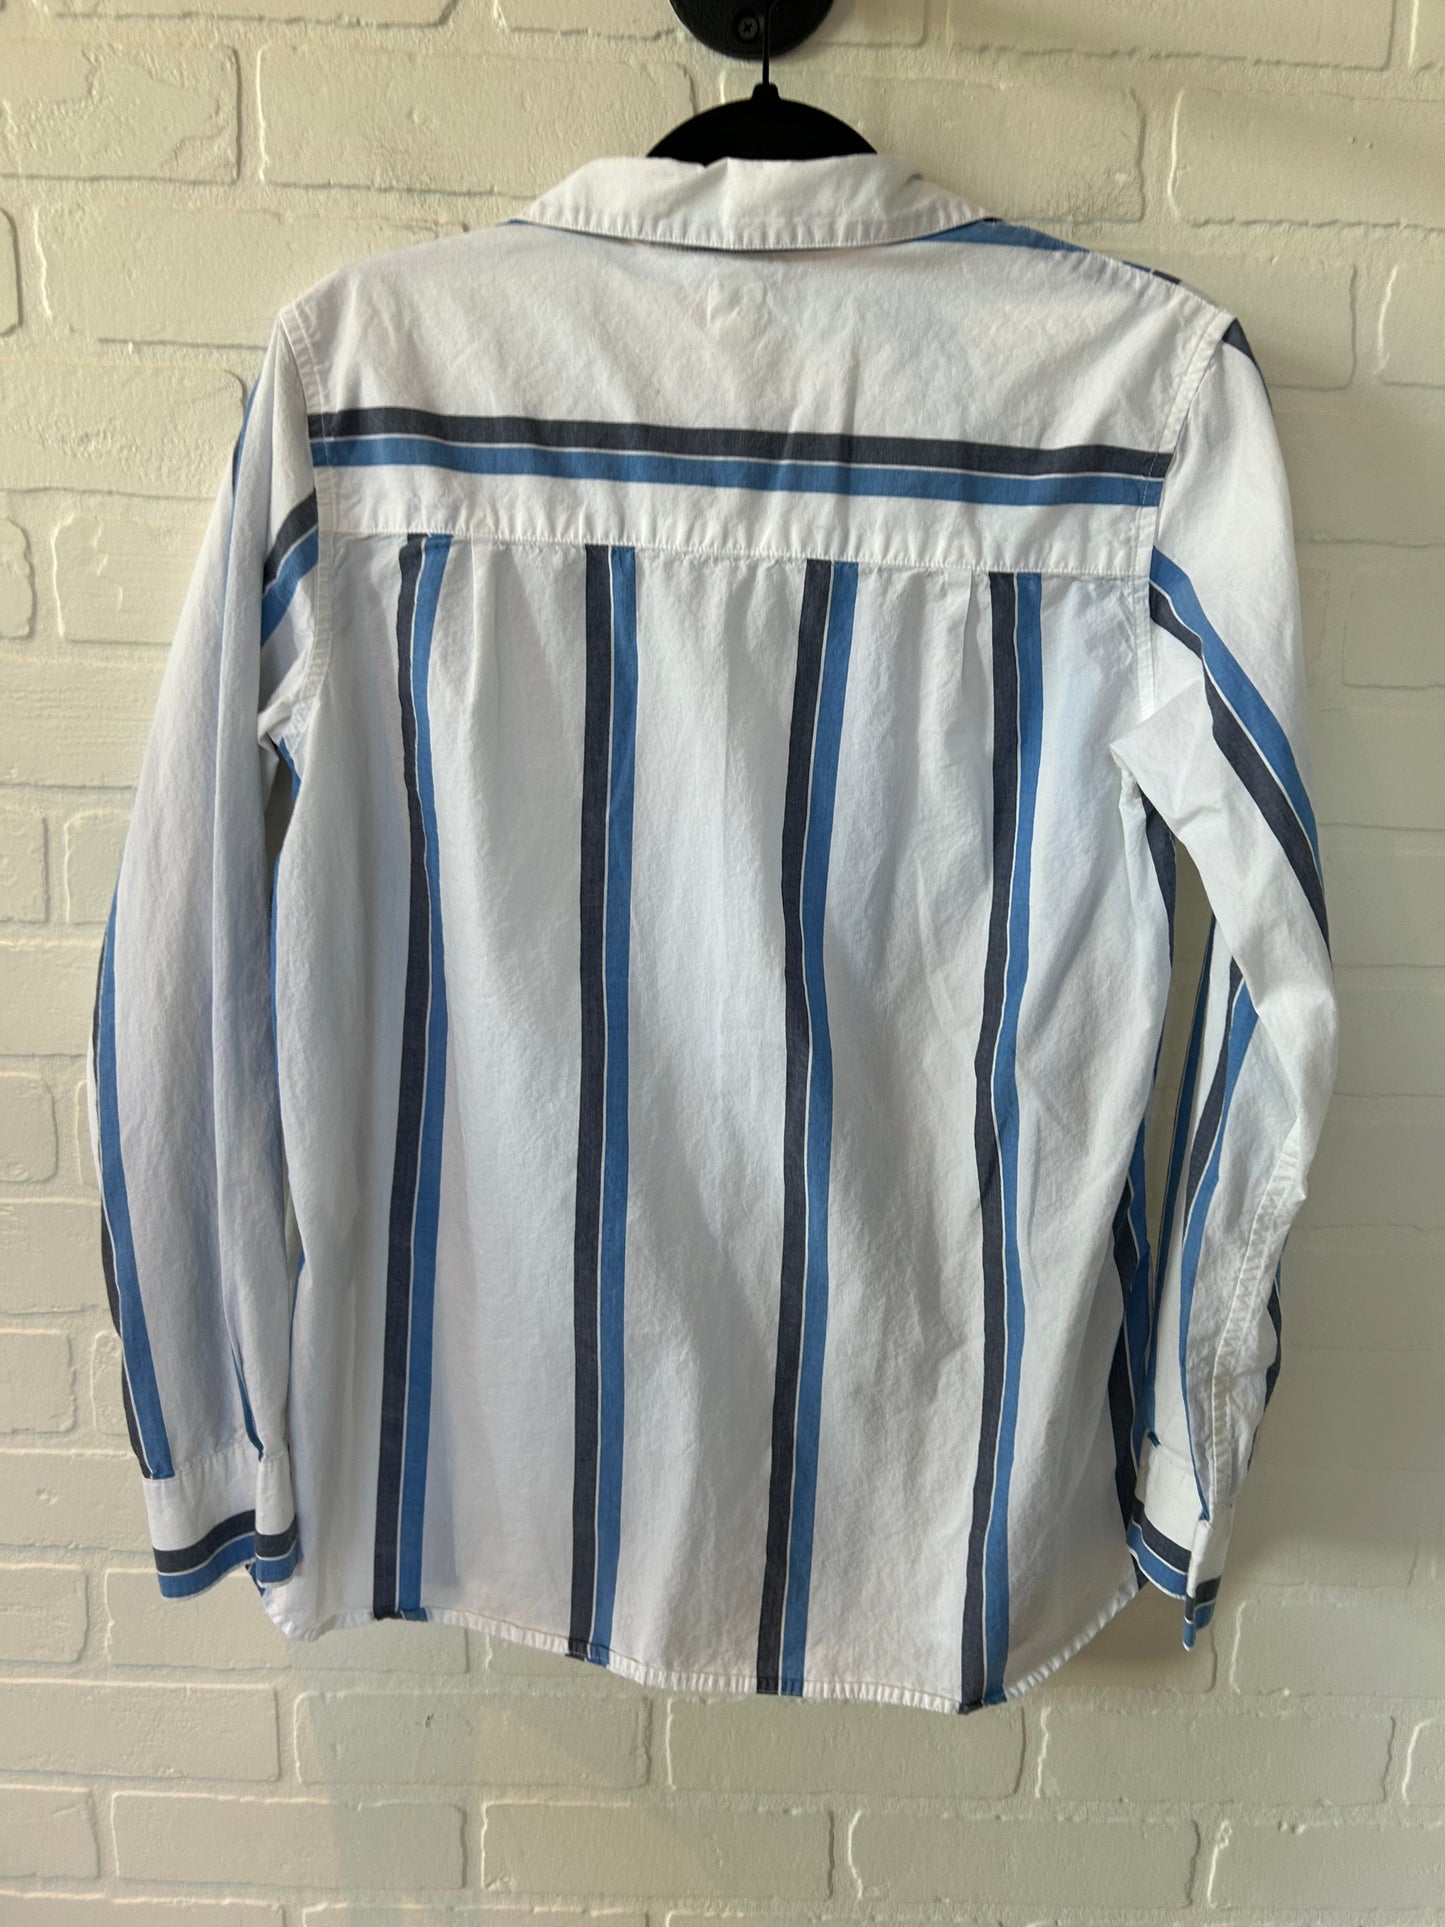 Blue & White Top Long Sleeve Gap, Size S